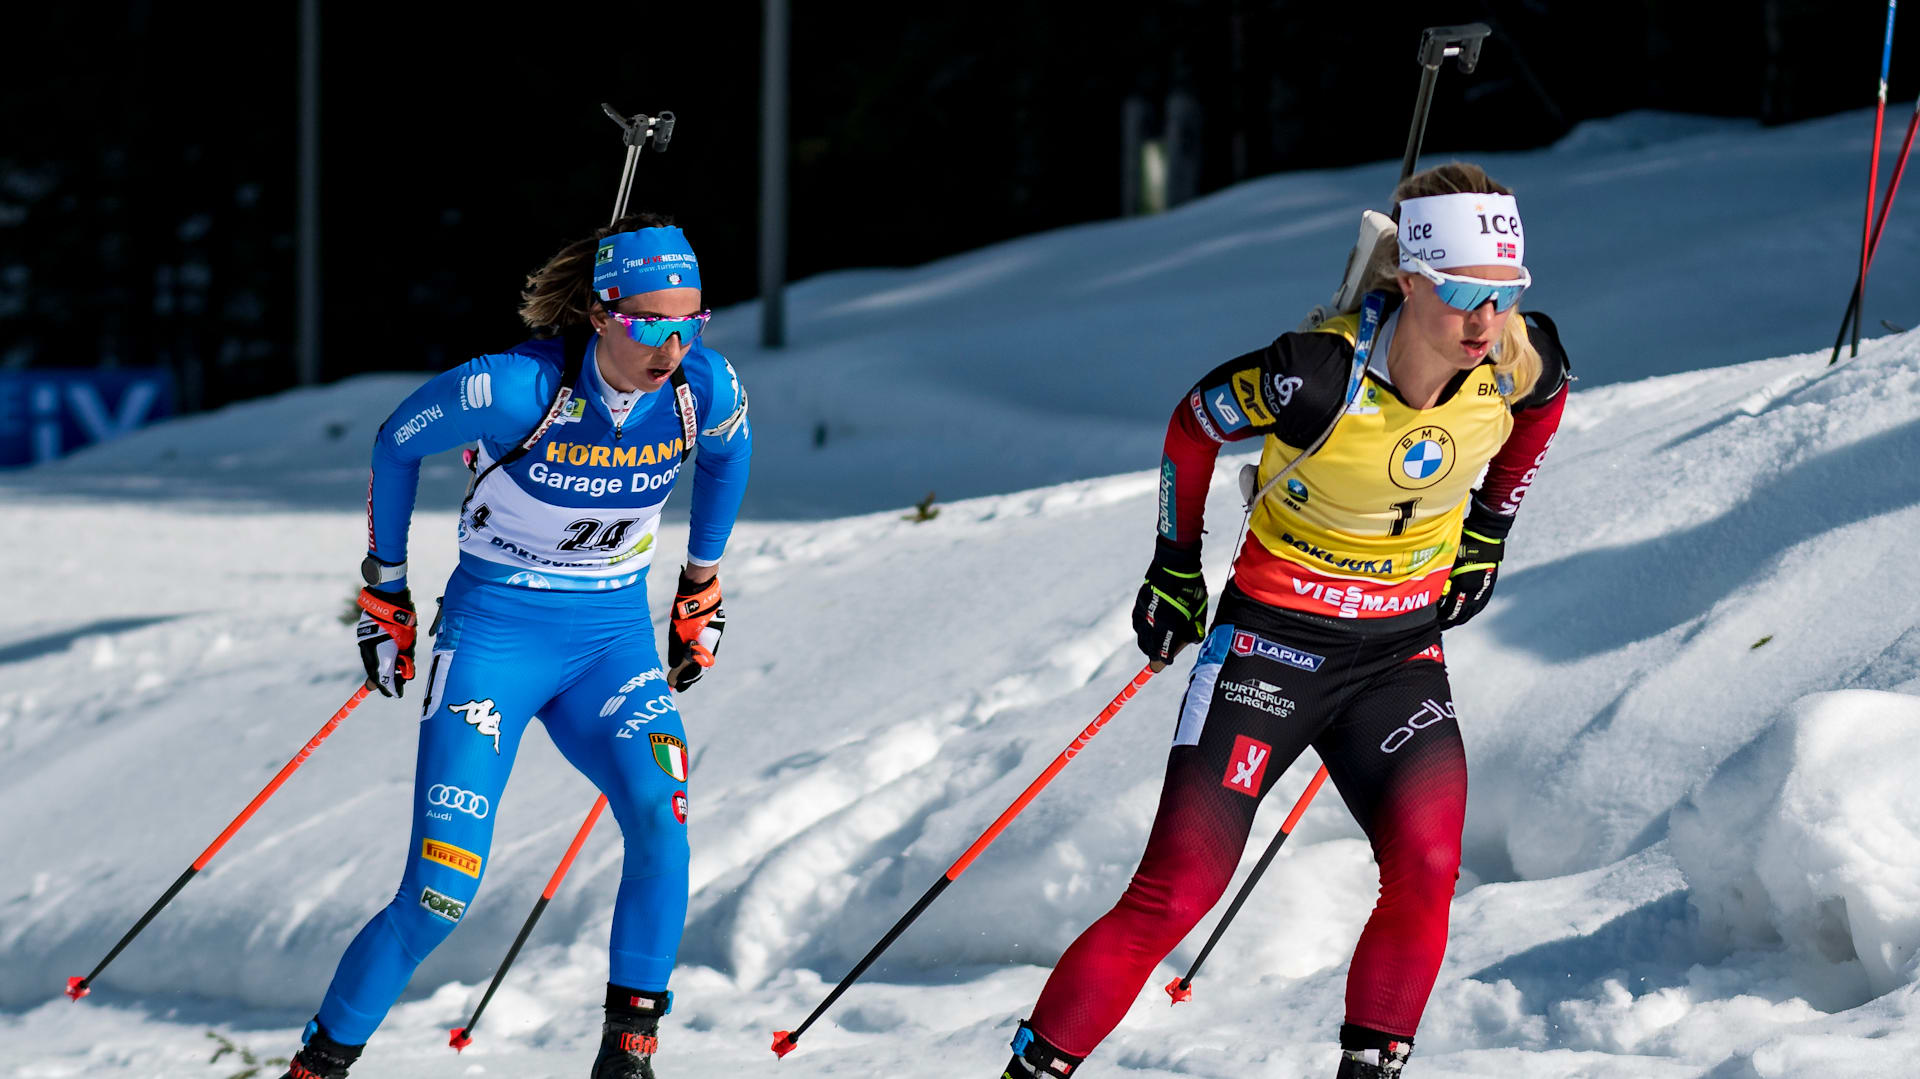 Top things you need to know about the 2021/22 biathlon season